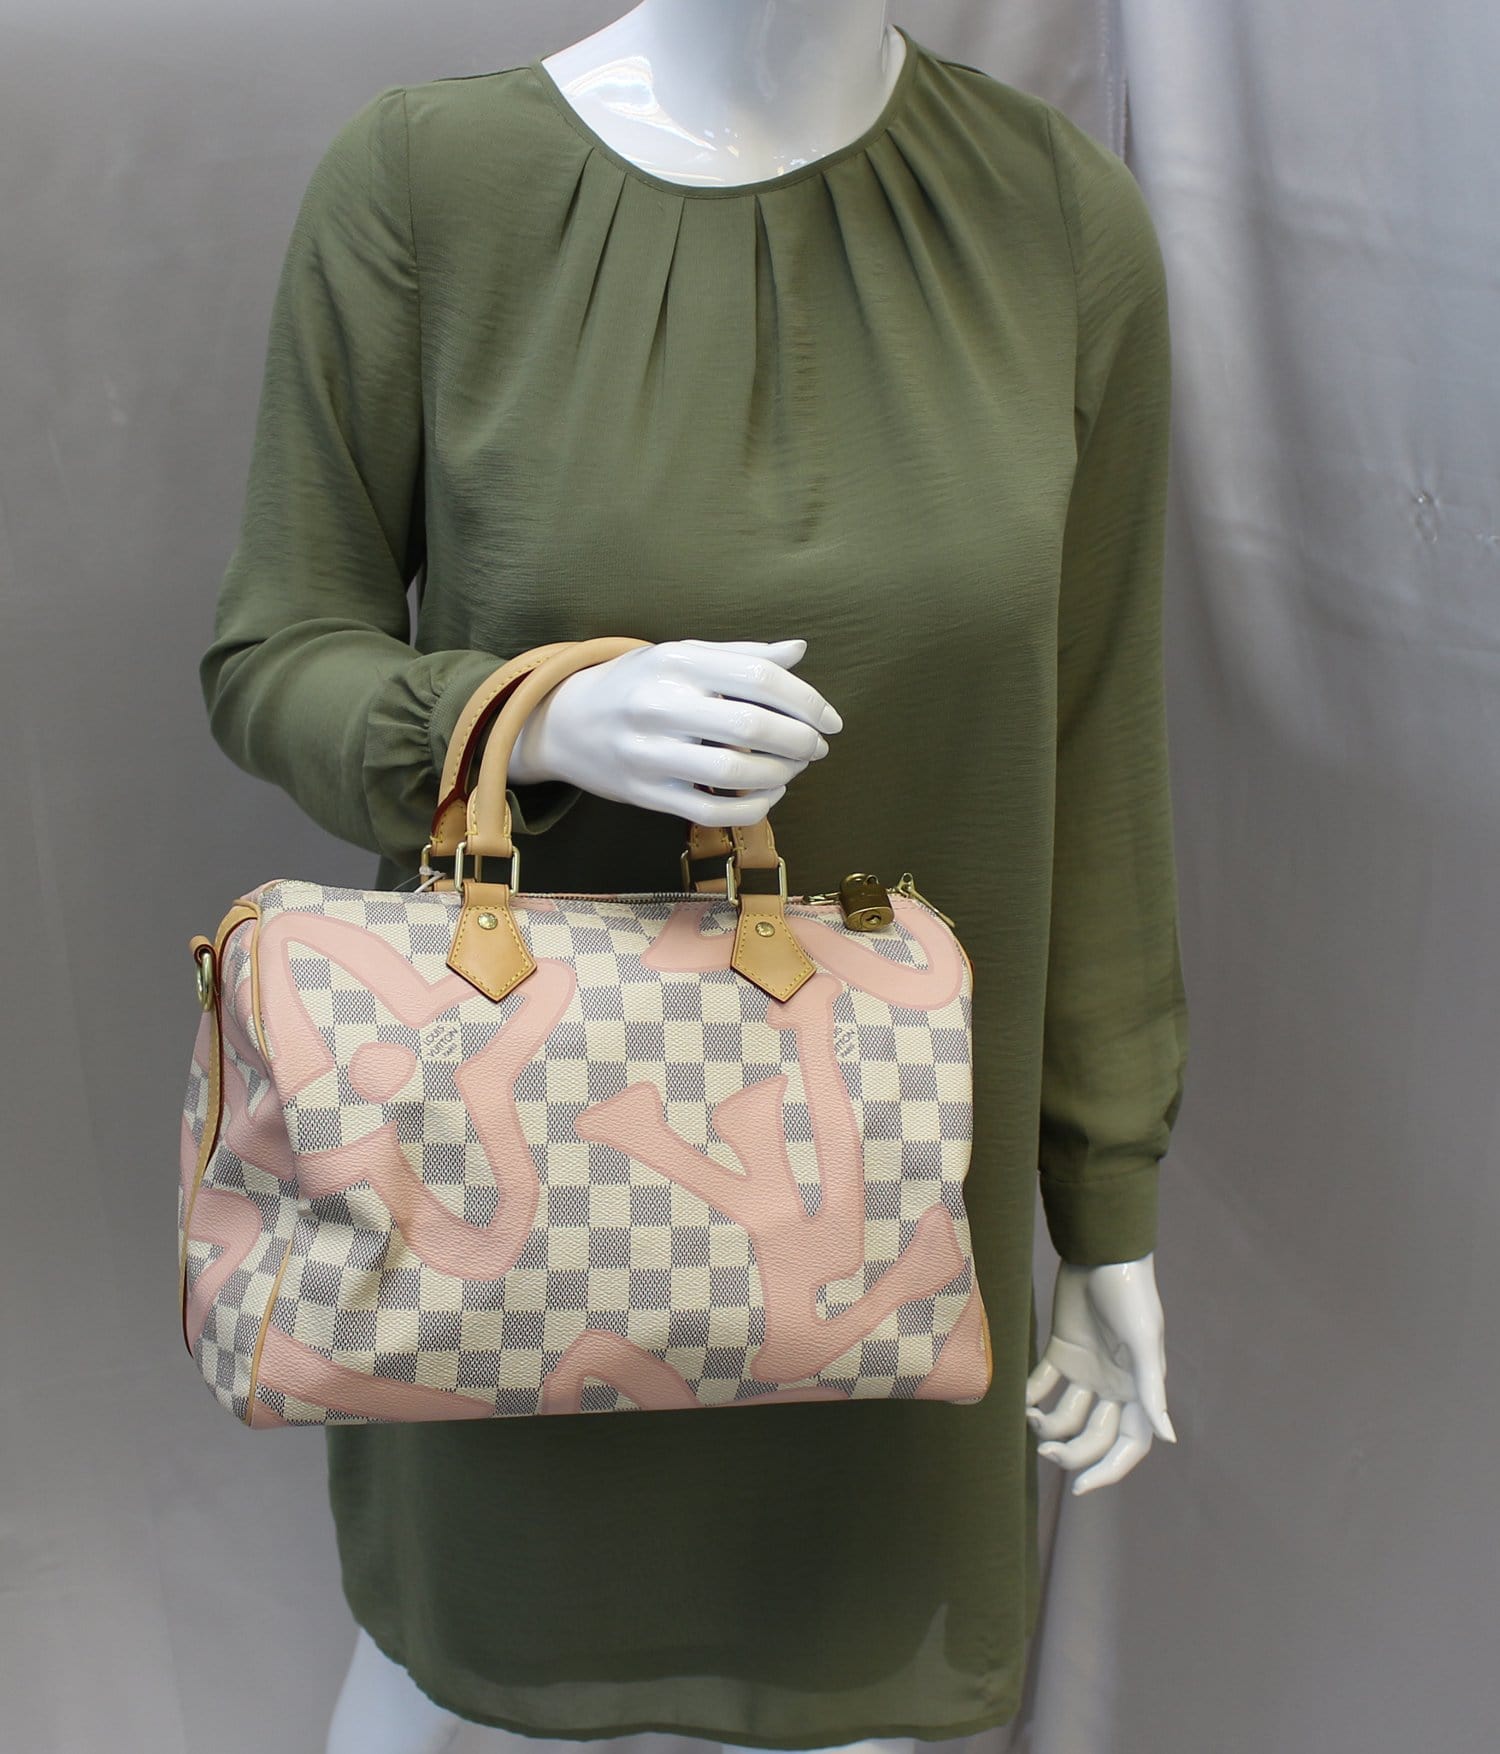 louisvuitton louis vuitton tahitienne speedy #outfit #outfit